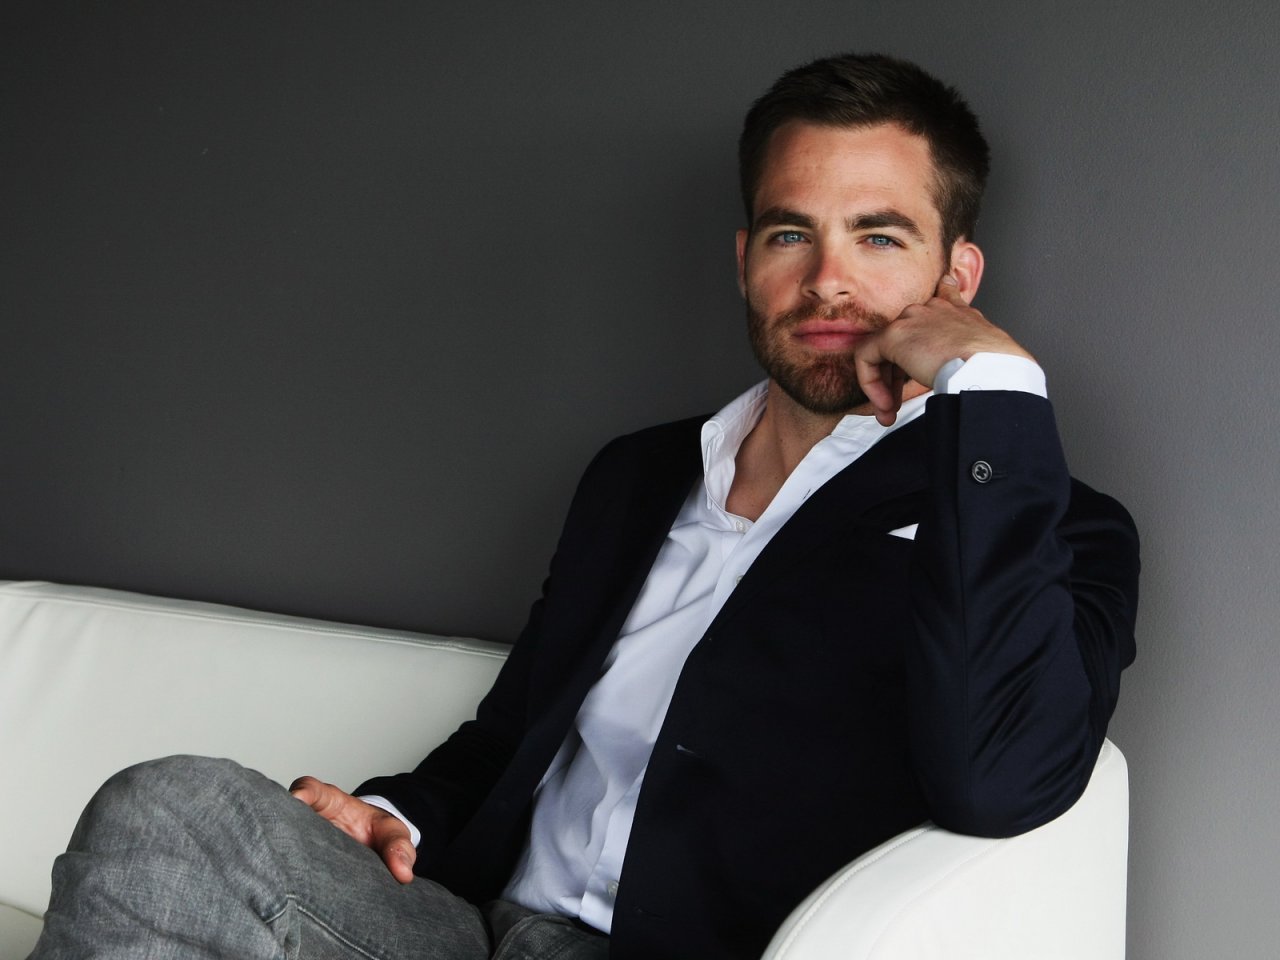 Chris Pine  picture image